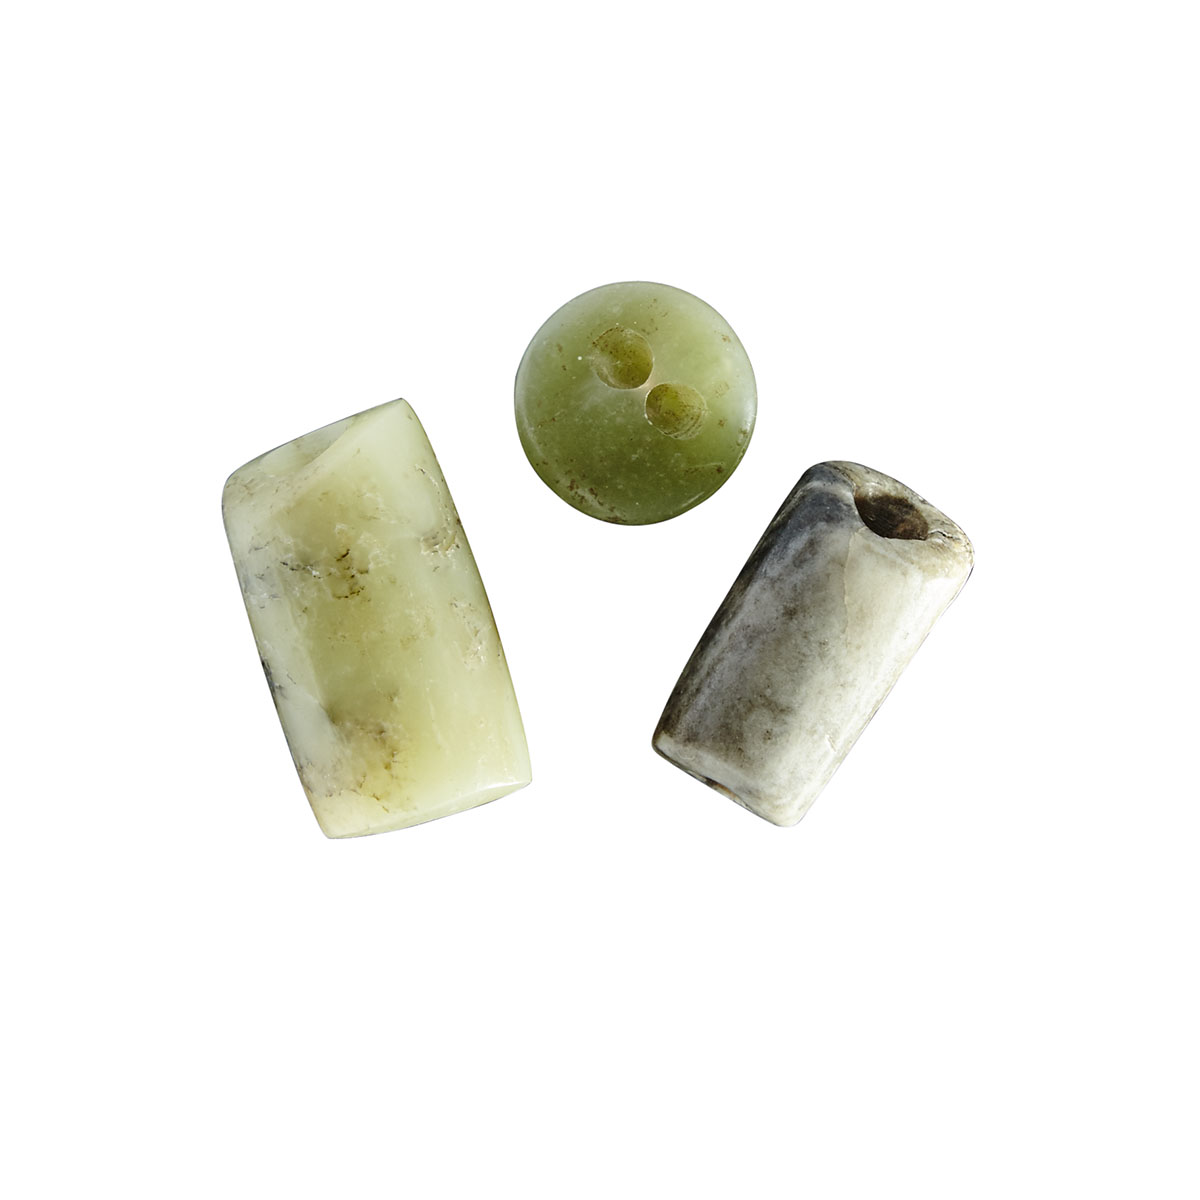 A Set of Three Jade Beads, Hongshan Culture, Neolithic Period or Later